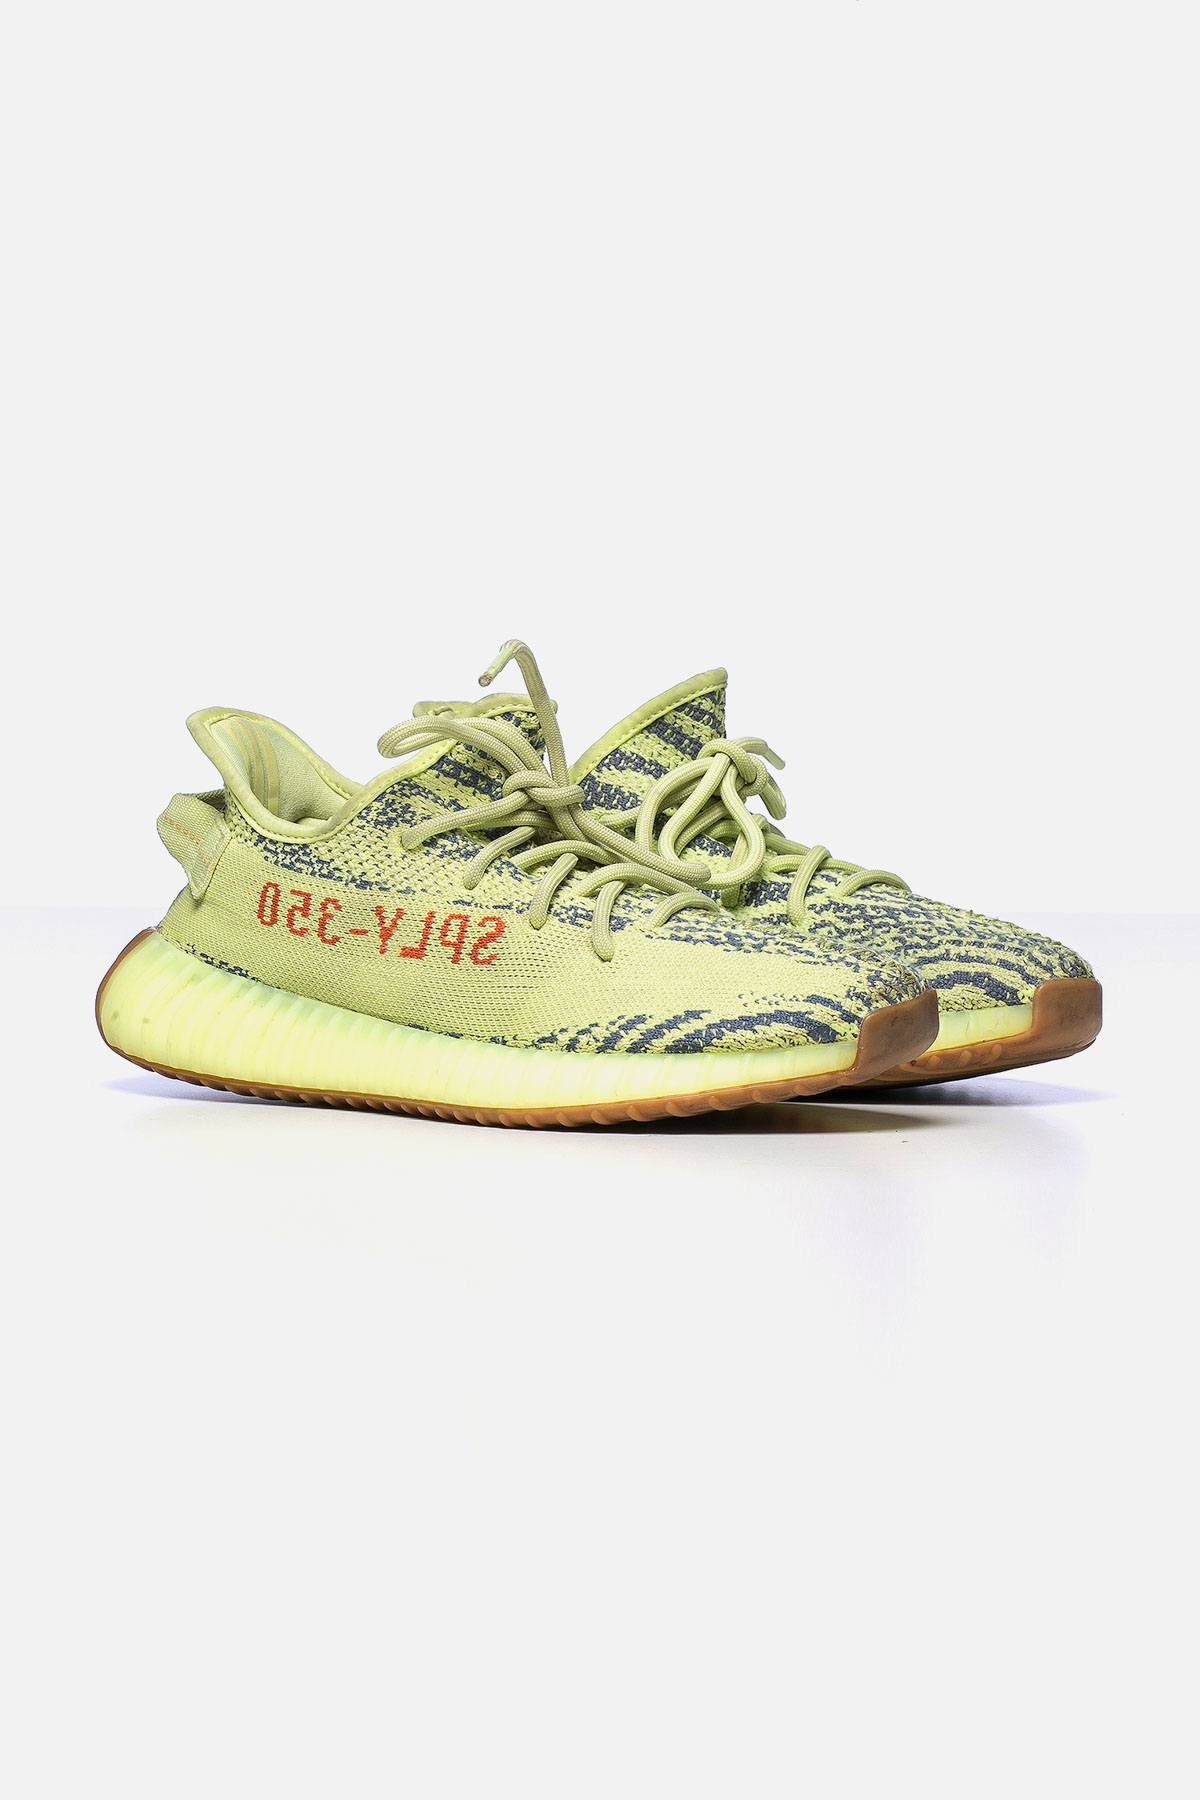 2017 BOOST 350 V2 FROZEN YELLOW SNEAKERS